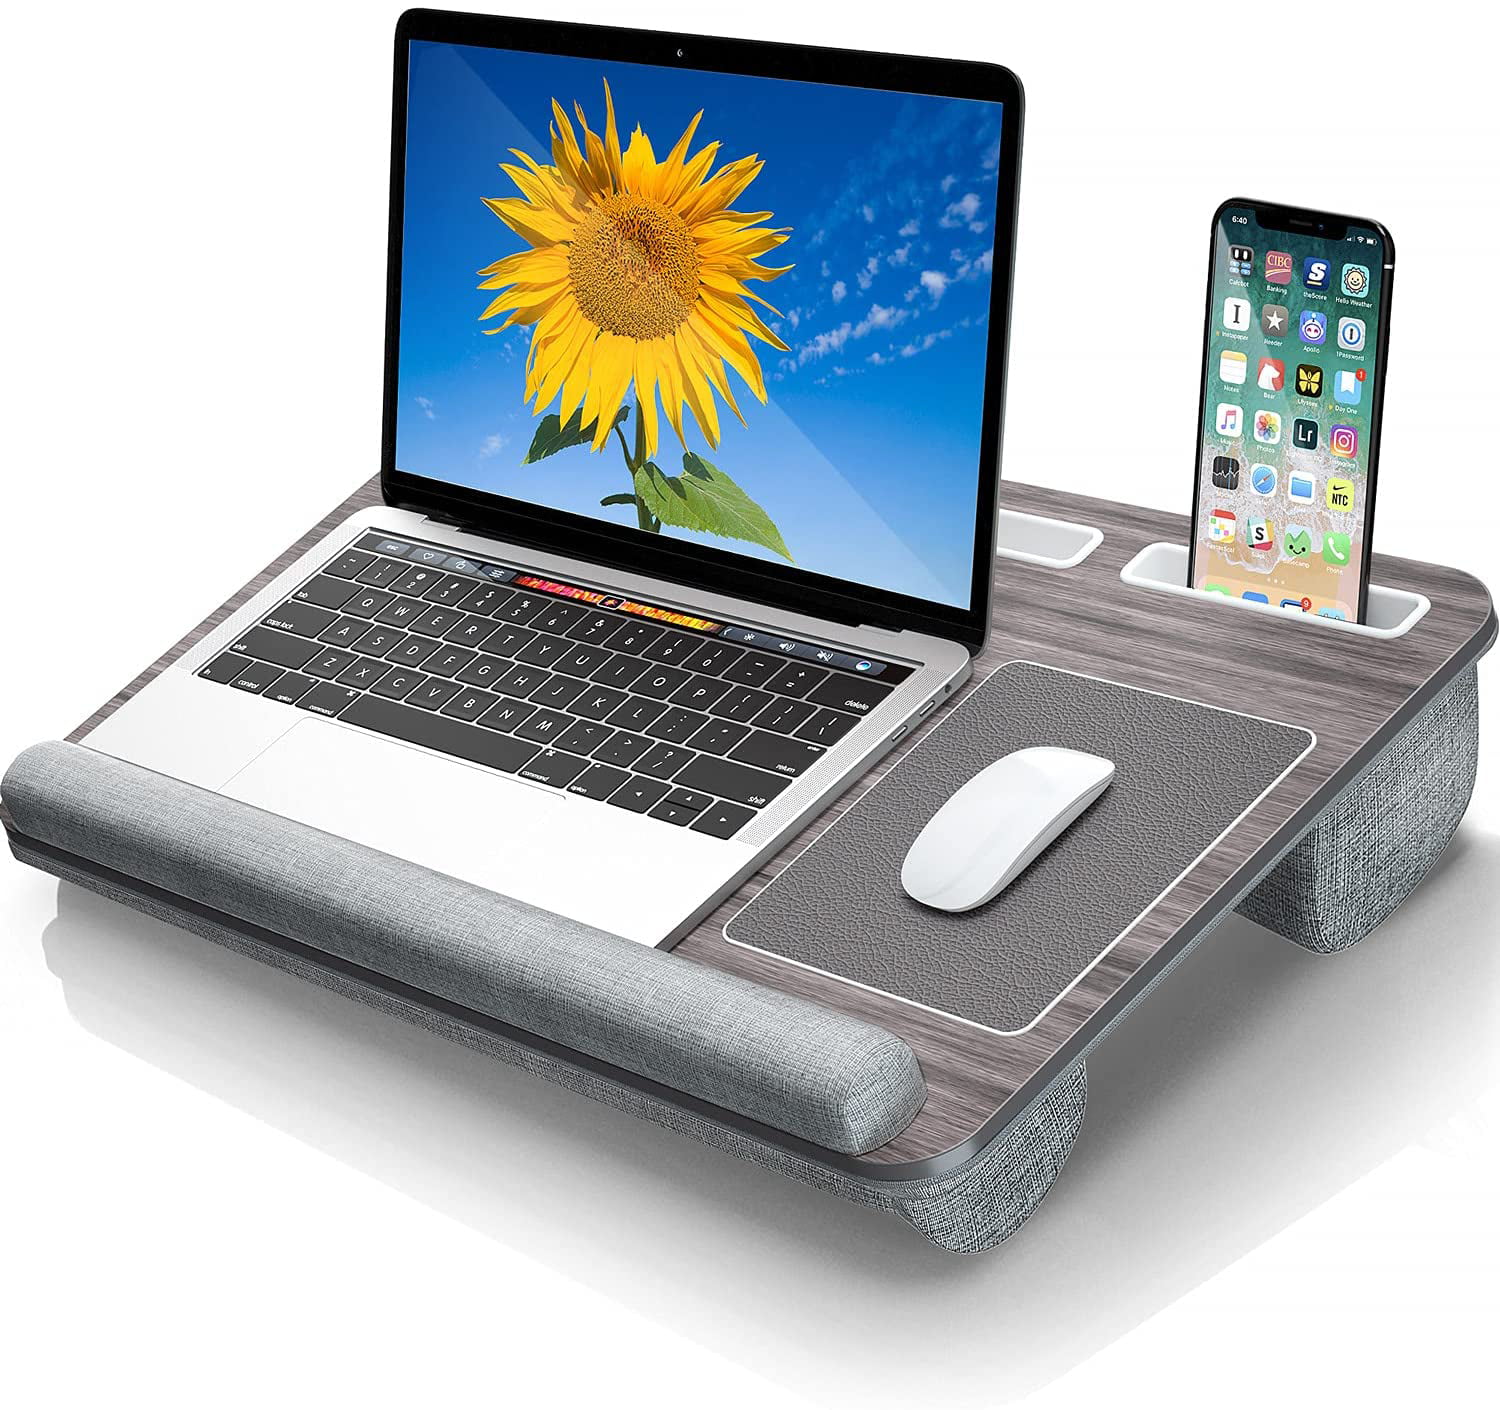 Home Office Lap Desk Fits up to 17 Inches Laptop with Cushion 